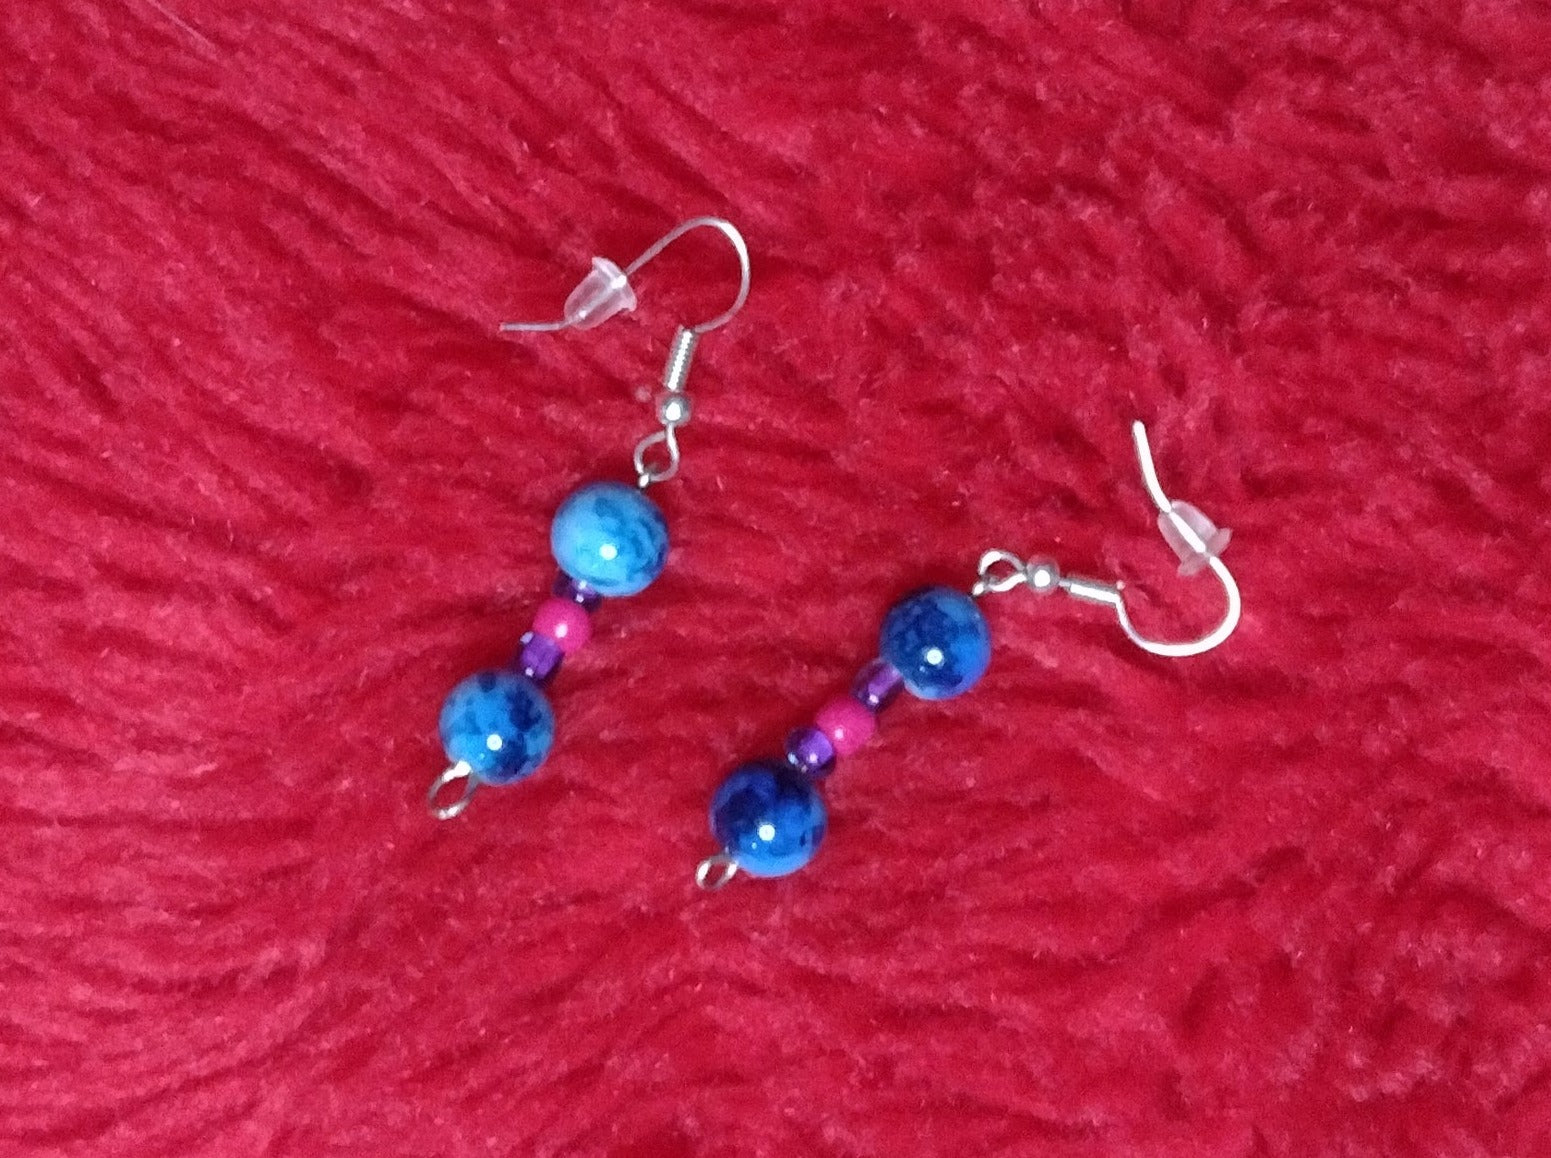 Blue Drop Earrings with two blue speceld beads one on the top and bottom. In between is a transparent small purple bead then a magenta glass bead and a purple glass bead.